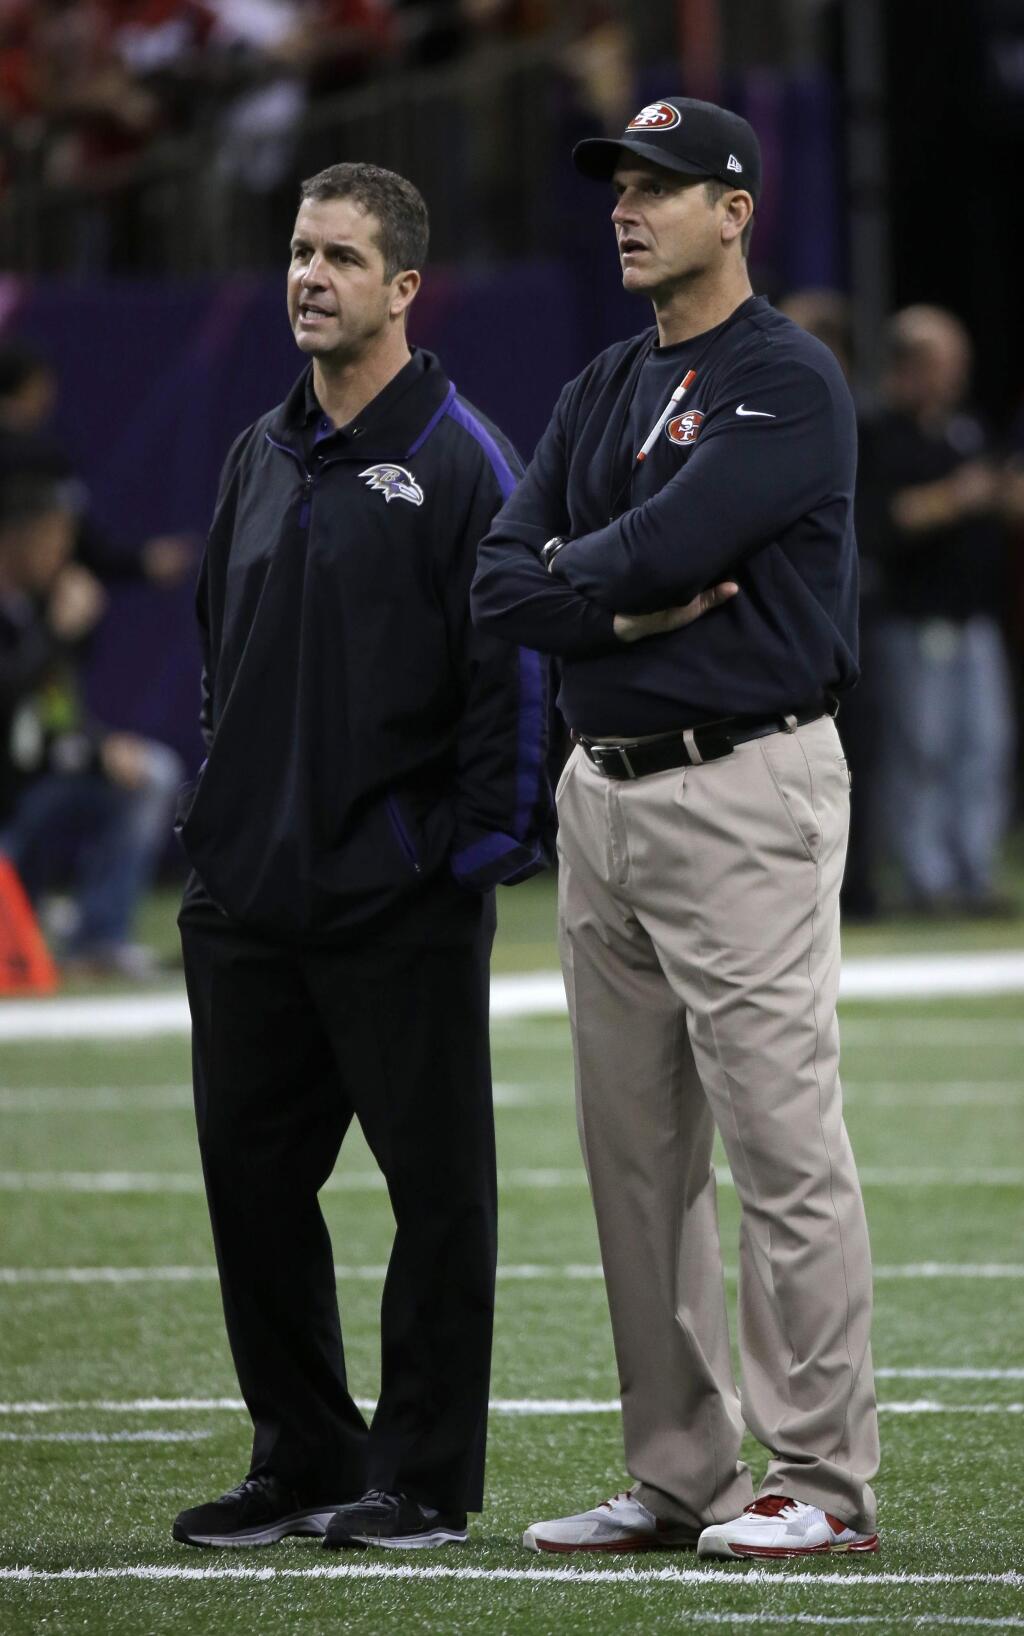 San Francisco 49ers head coach Jim Harbaugh, right, and Baltimore Ravens head coach John Harbaugh look on during warmups before the NFL Super Bowl XLVII football game, Sunday, Feb. 3, 2013, in New Orleans. (AP Photo/Matt Slocum)